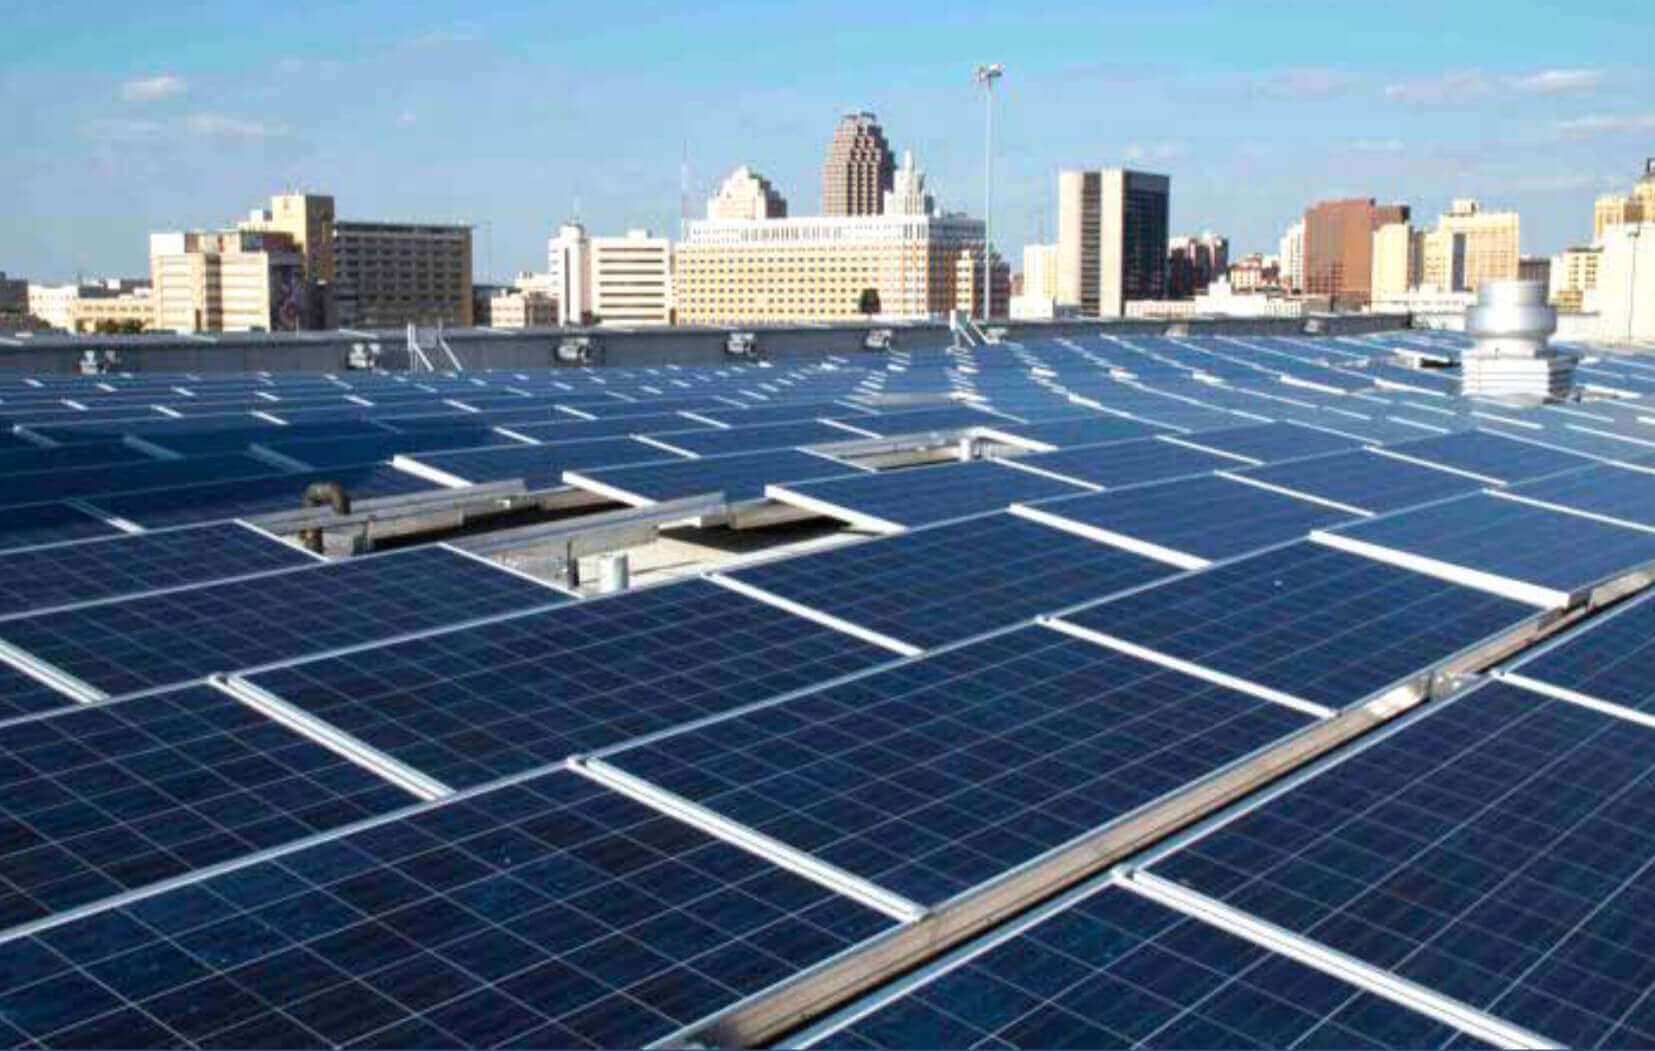 Frontier Group’s annual survey of solar energy in cities shows that with supportive policies, every American city can become a “Solar Superstar.” Pictured, the San Antonio skyline beyond rows of solar panels. Photo: The University of Texas at San Antonio.